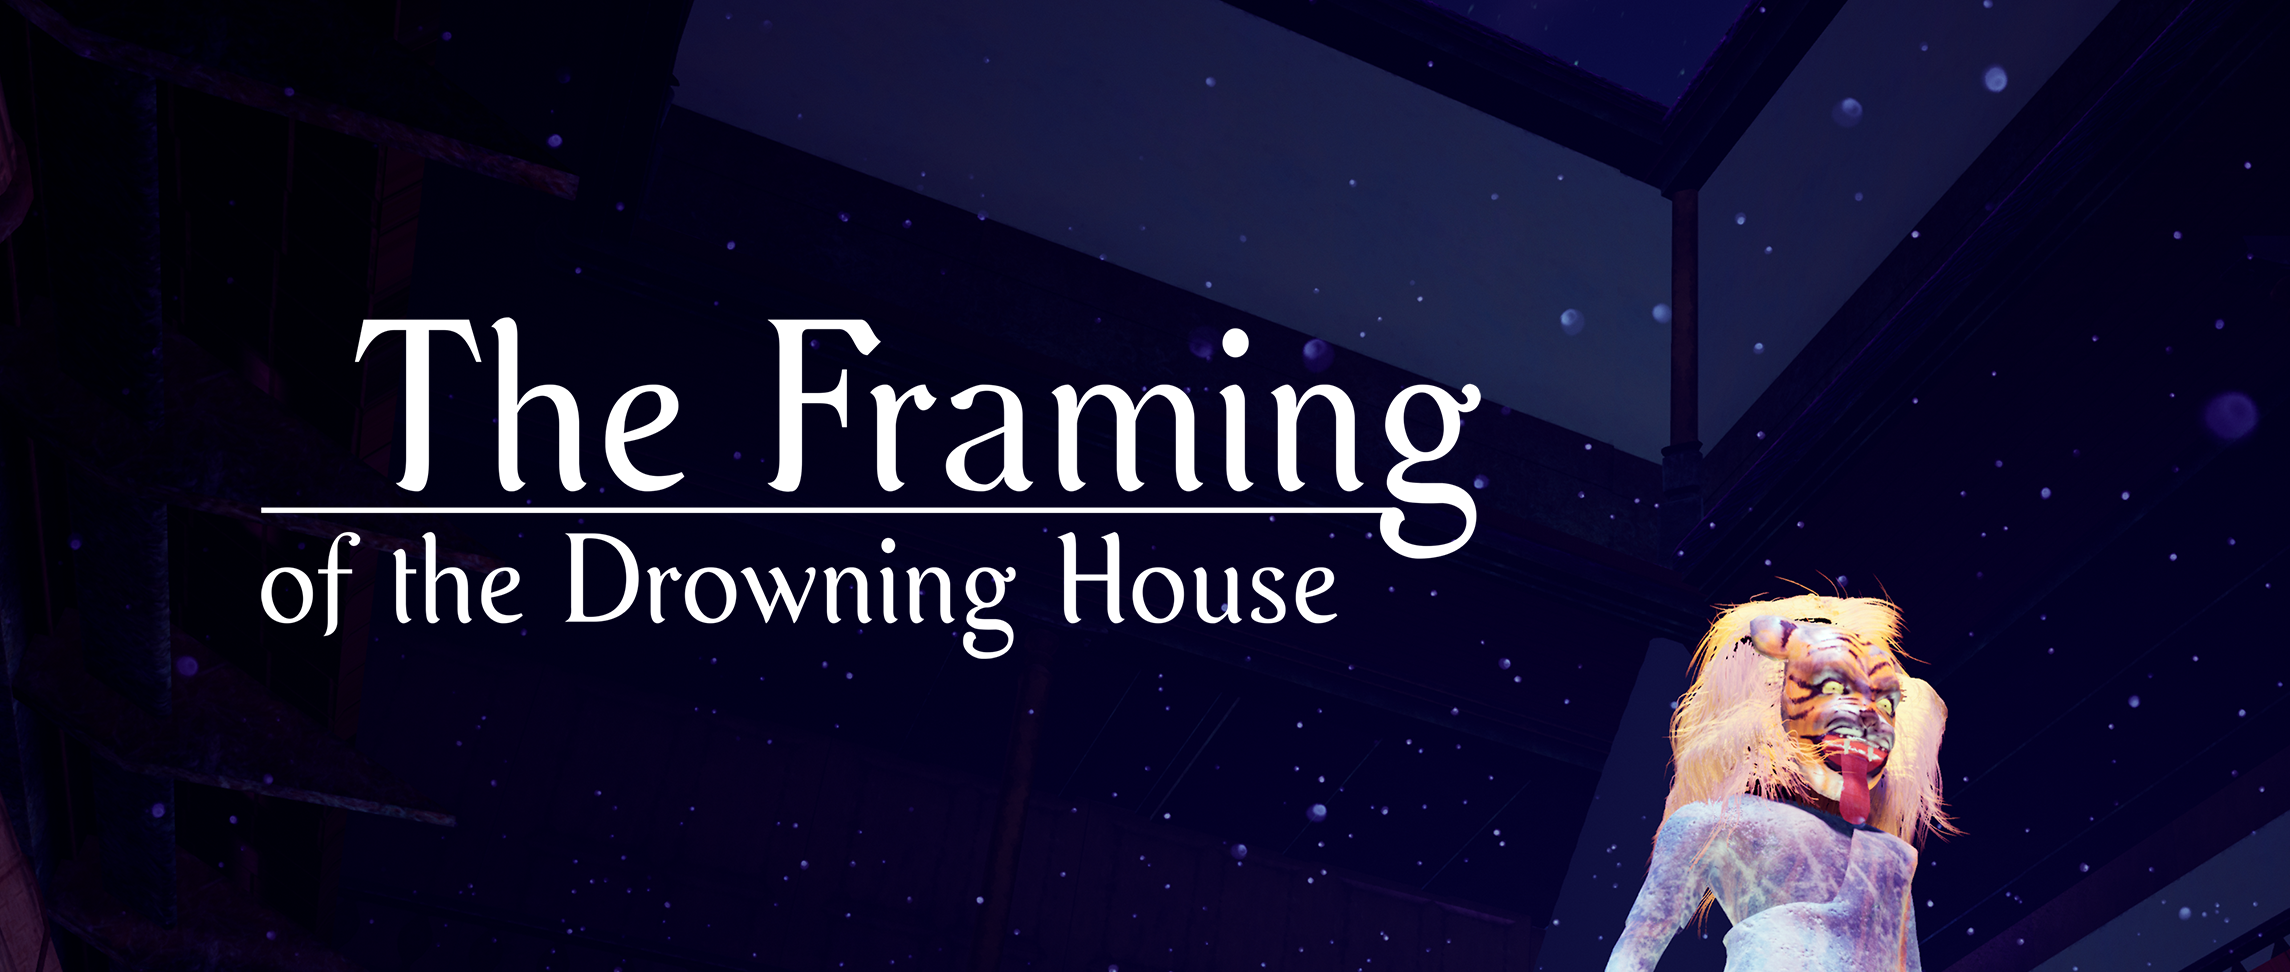 The Framing of the Drowning House